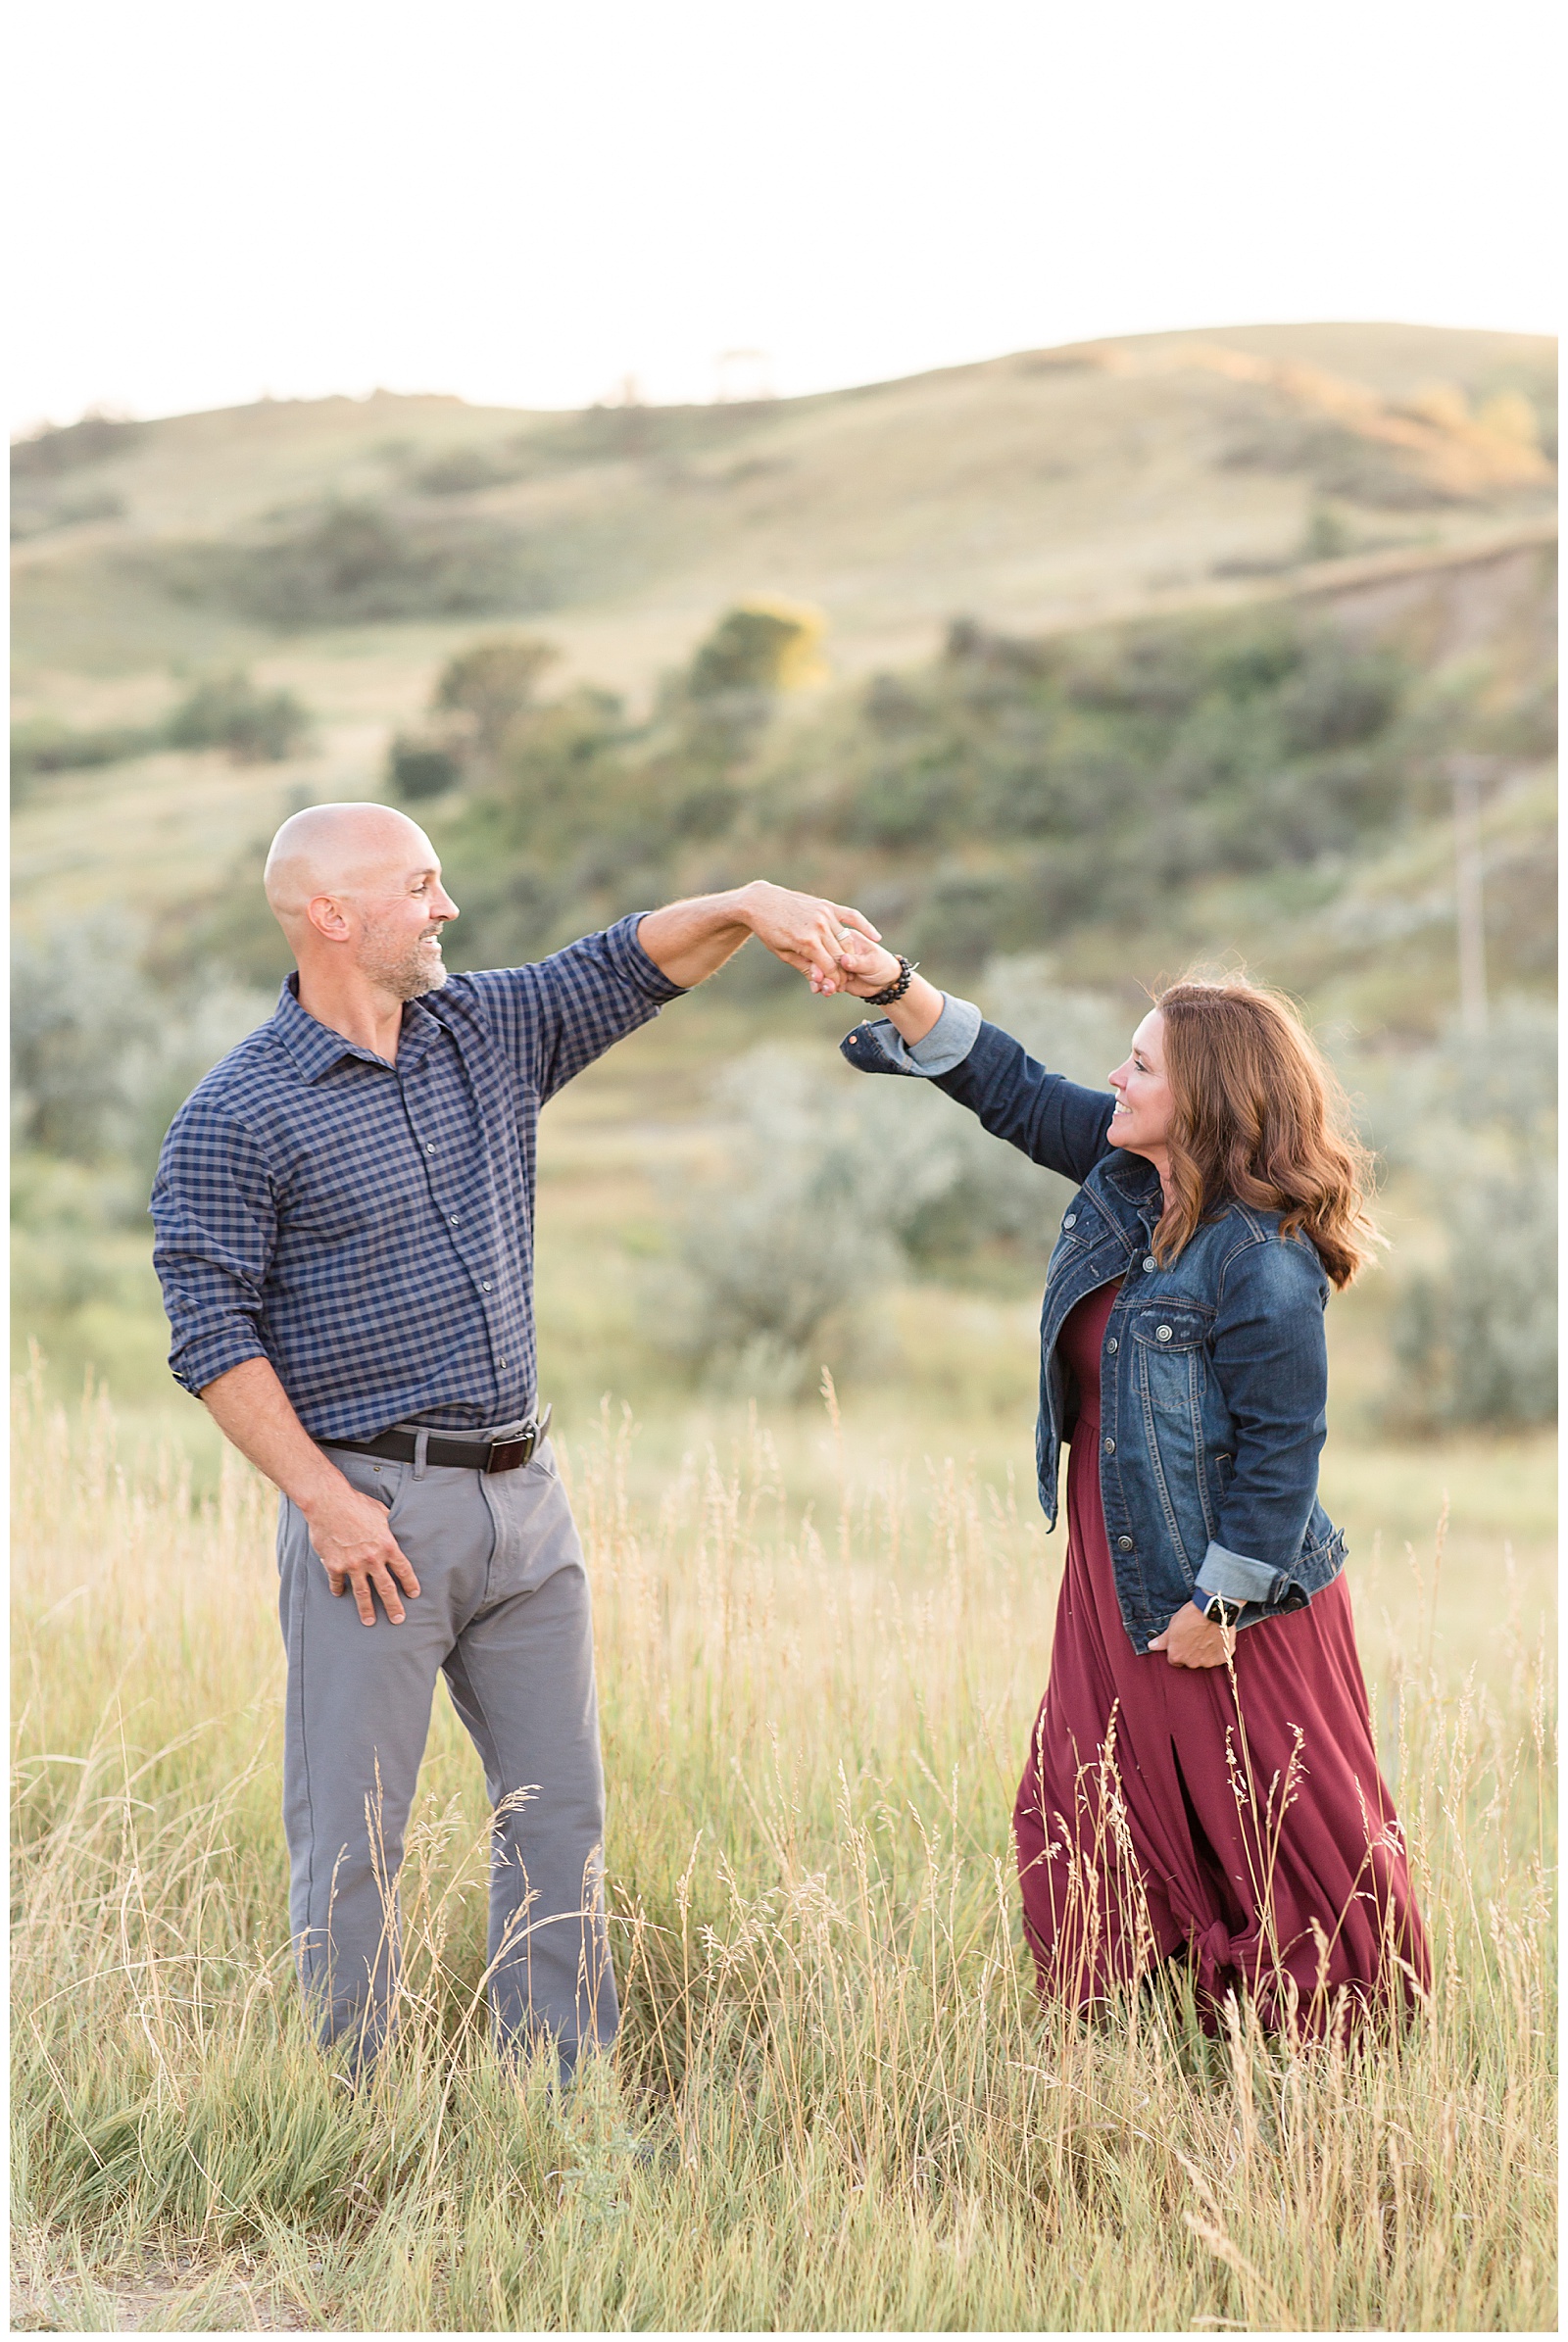 Gorgeous hills in North Dakota are the perfect backdrop for Mom and Dad to spin and dance in the open fields for Rebecca Rice Photography's camera.